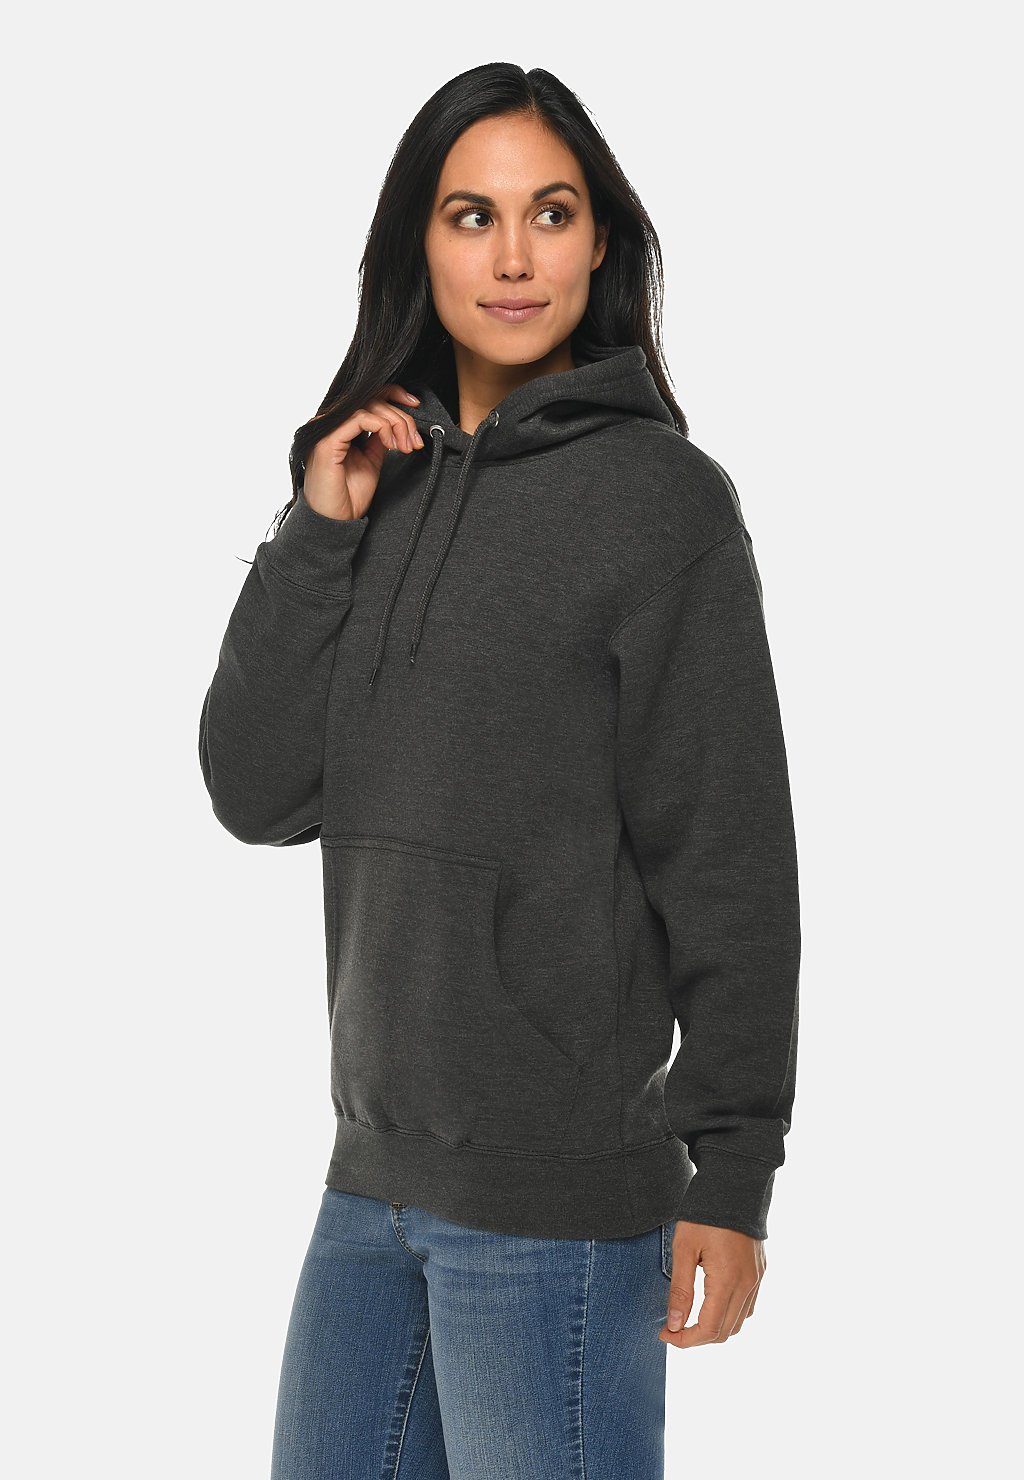 Image of CHARCOAL GREY Hoodie (Unisex) with Embroidered Logos *Matches Charcoal Grey Joggers